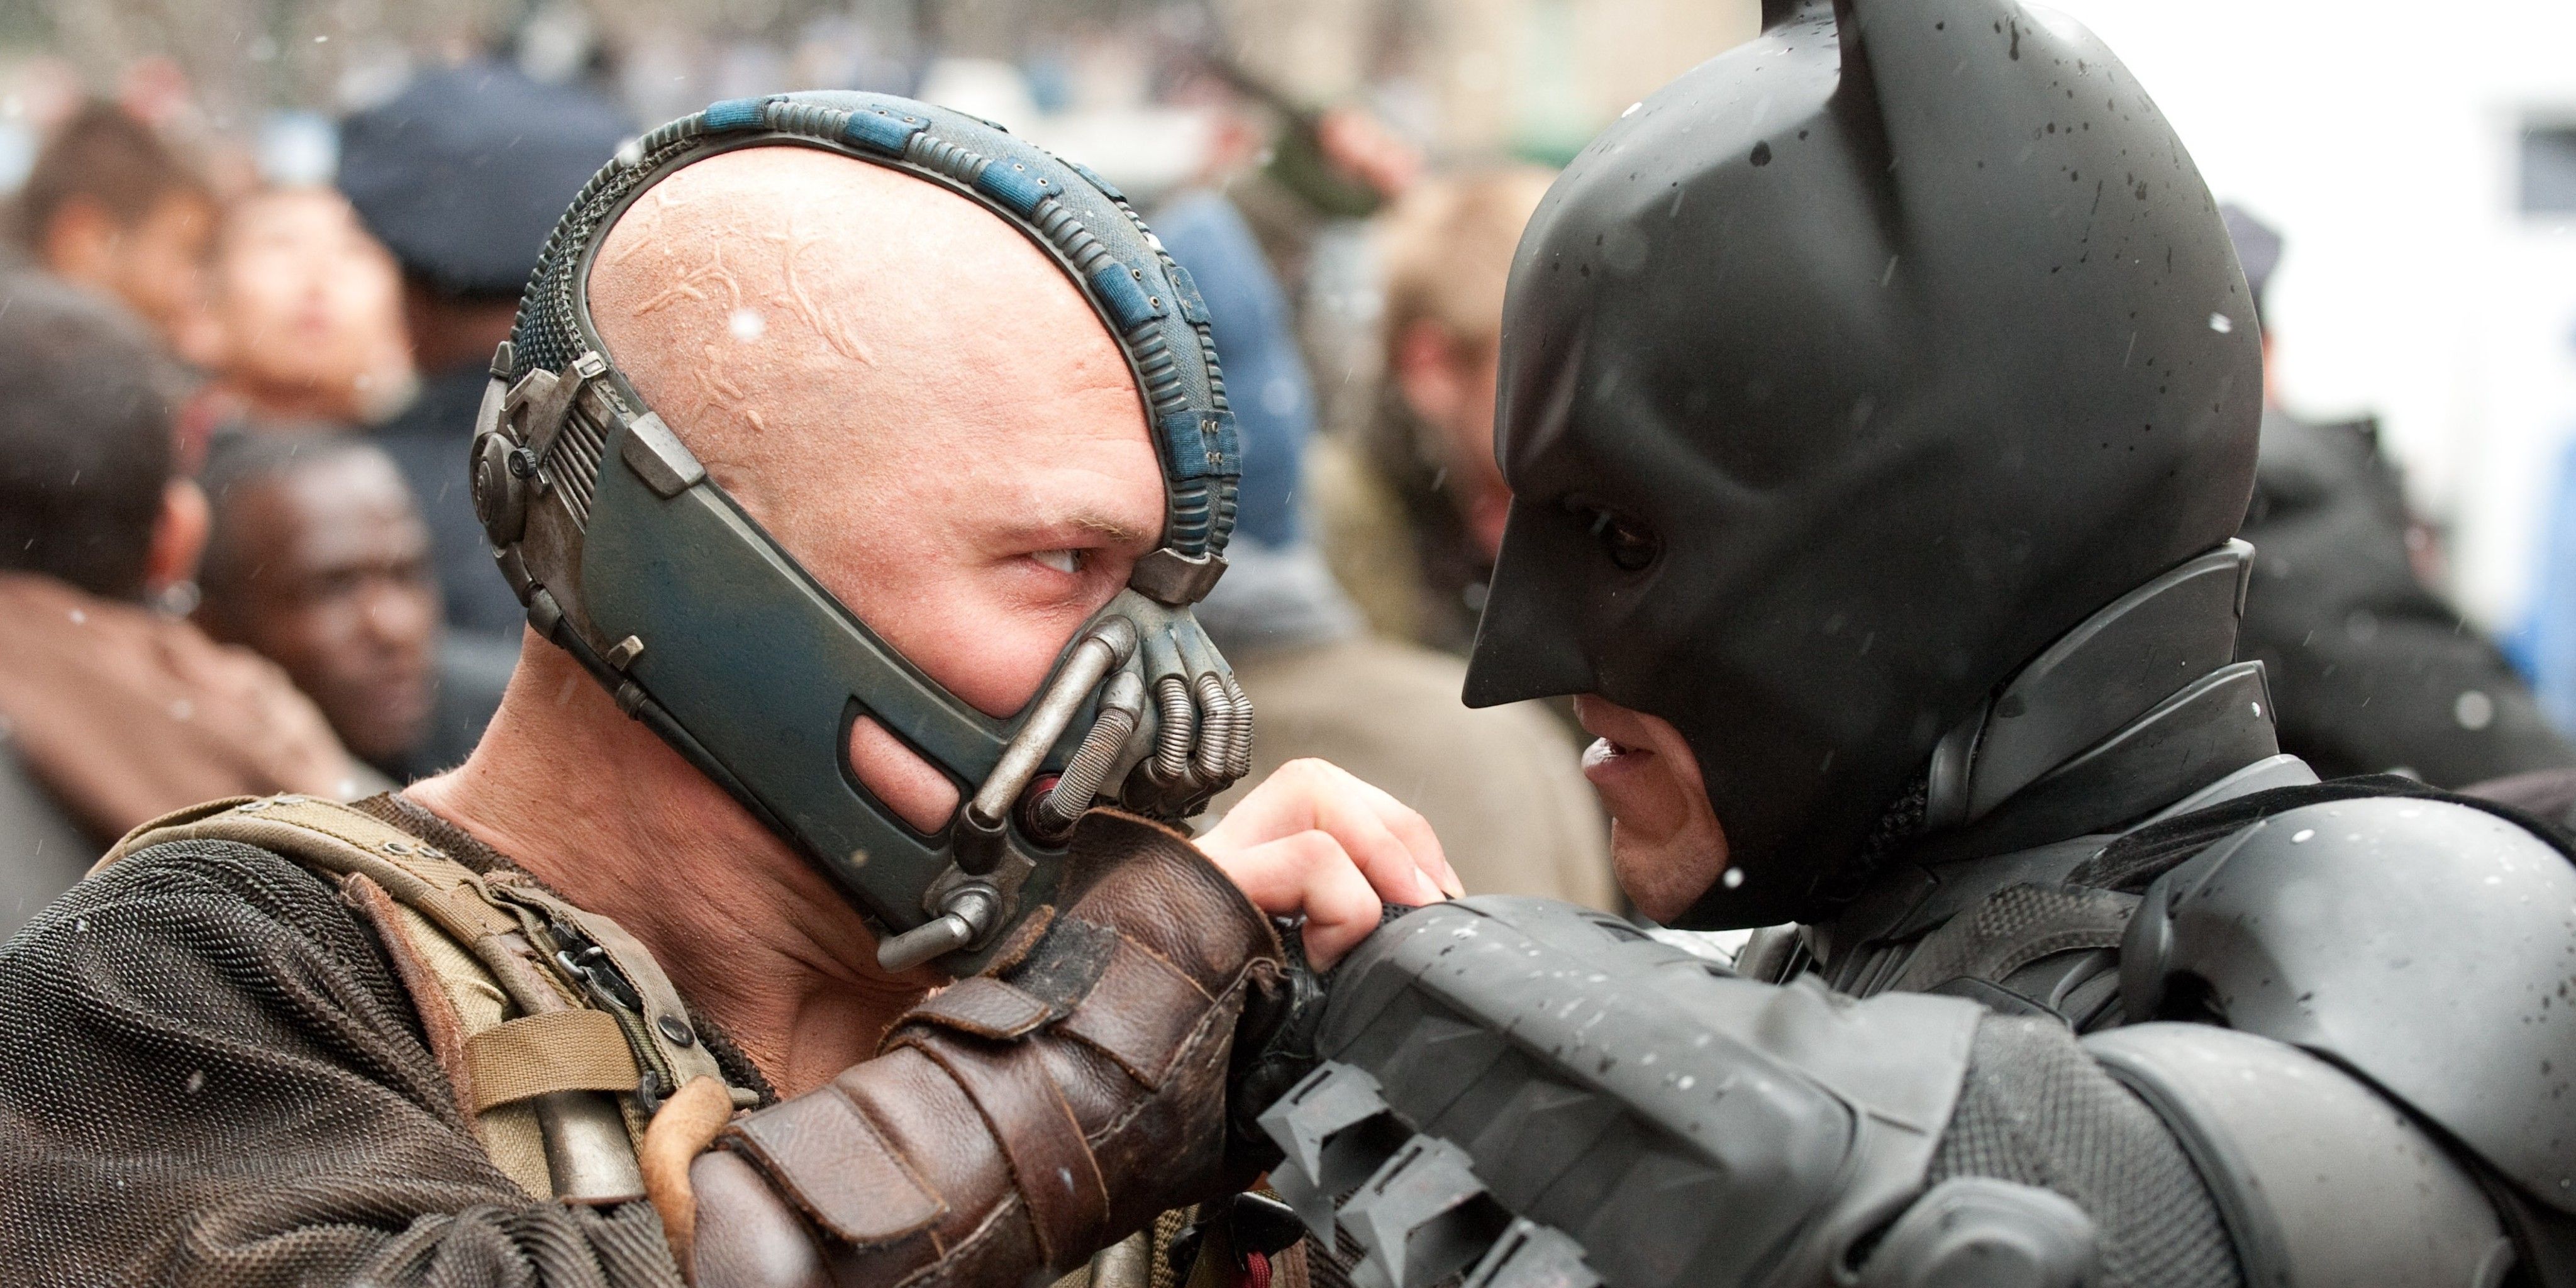 Batman and Bane fighting in The Dark Knight Rises